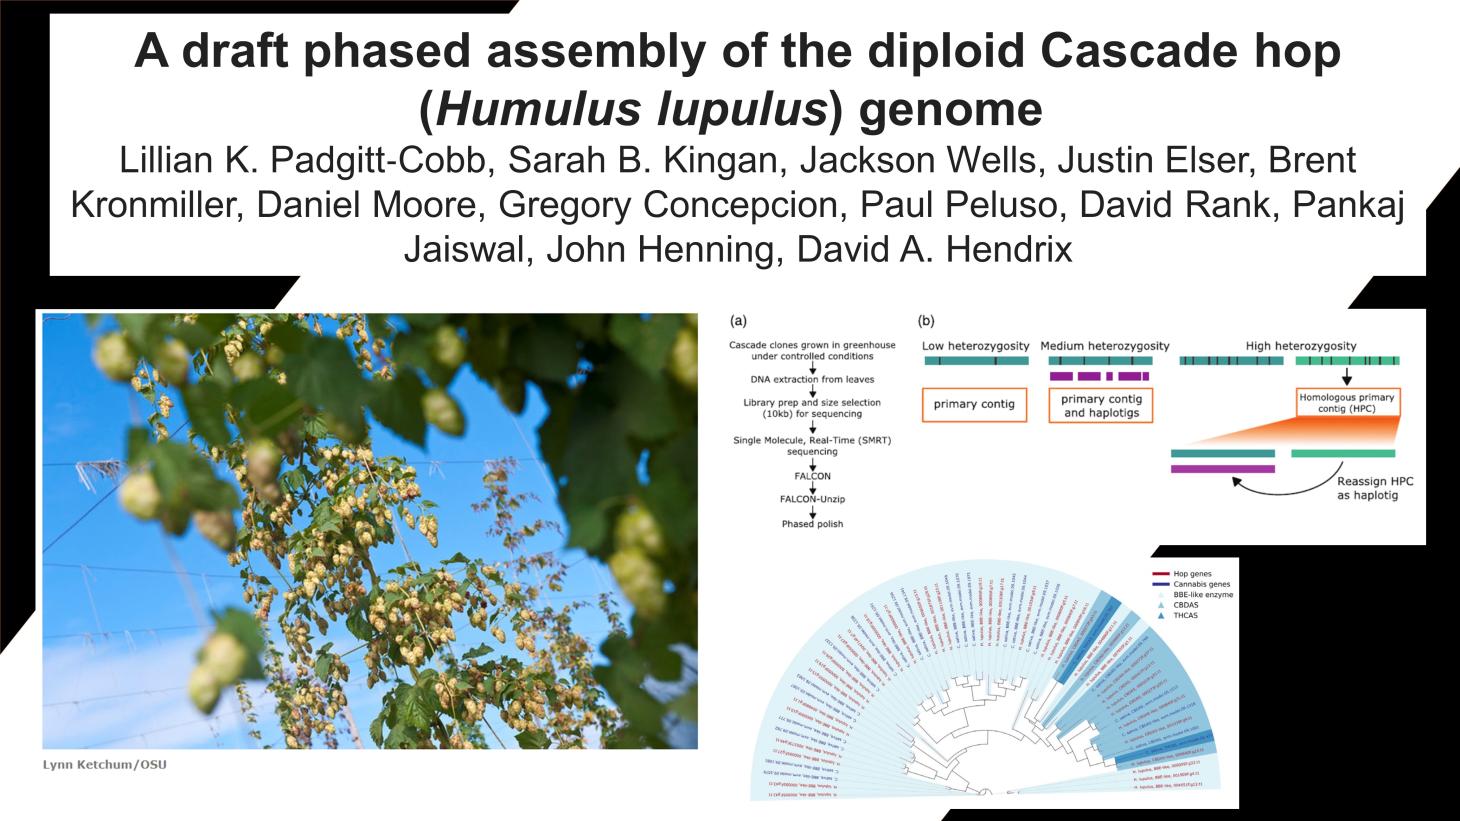 A draft phased assemble of the diploid Cascade hop genome.